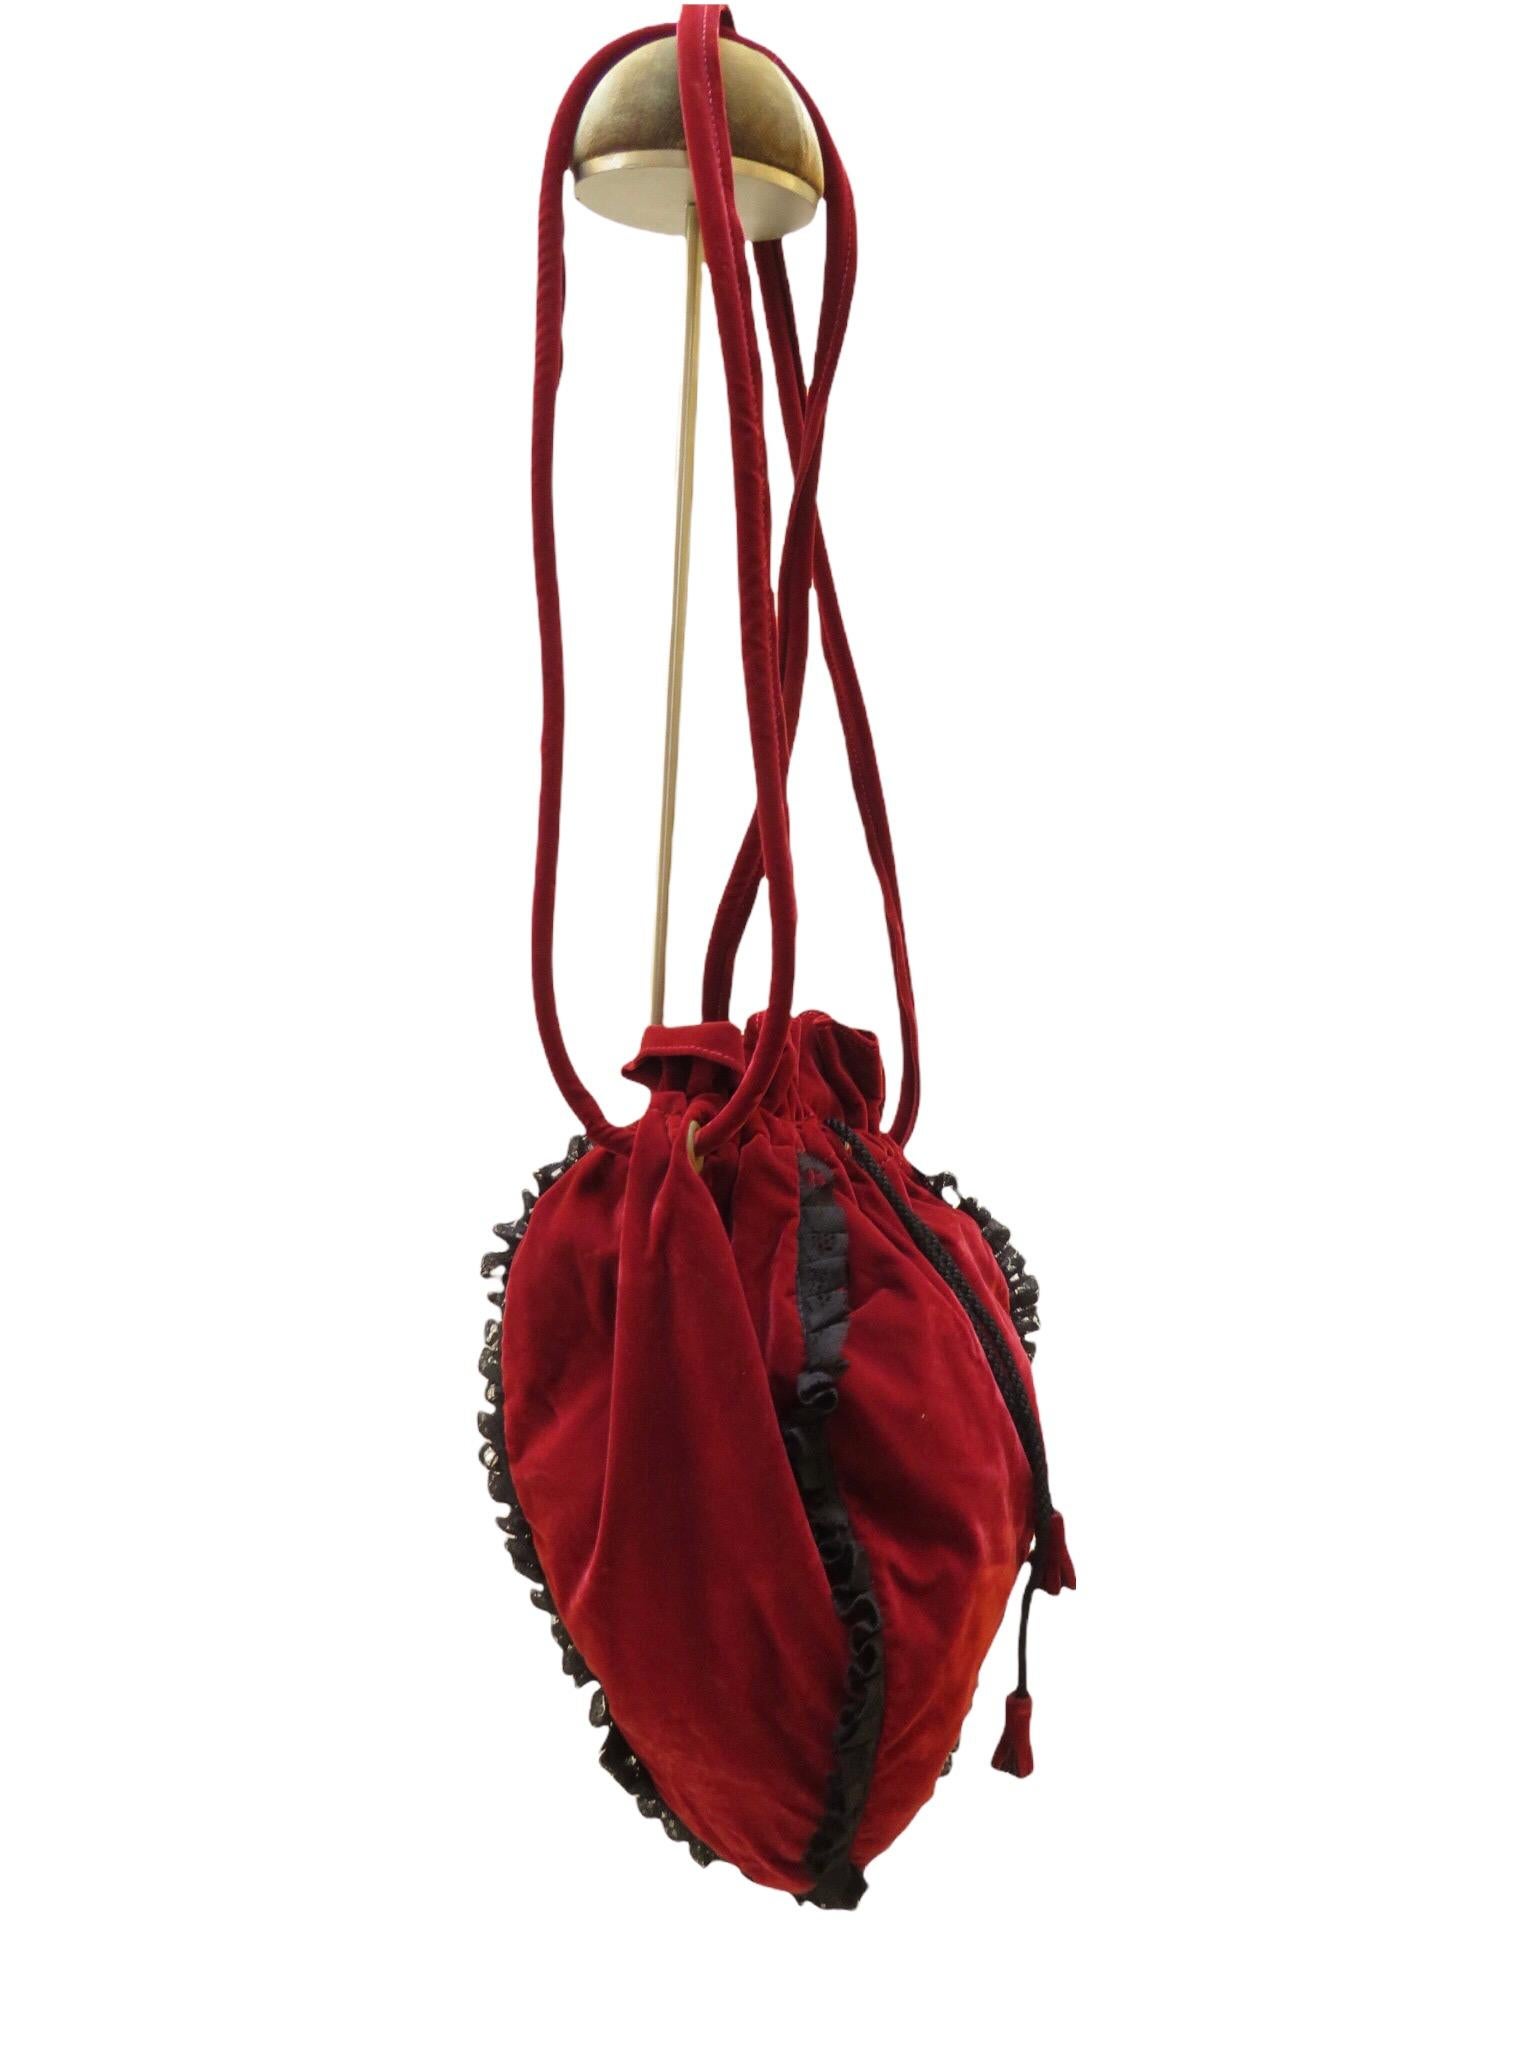 A double strapped red velvet drawstring pouch shoulder bag comes from vintage Chantal Thomass, with black lace ruffle edging and a satin cord drawstring with red leather pulls. Once inside, you'll be treated to plenty of storage with a special black